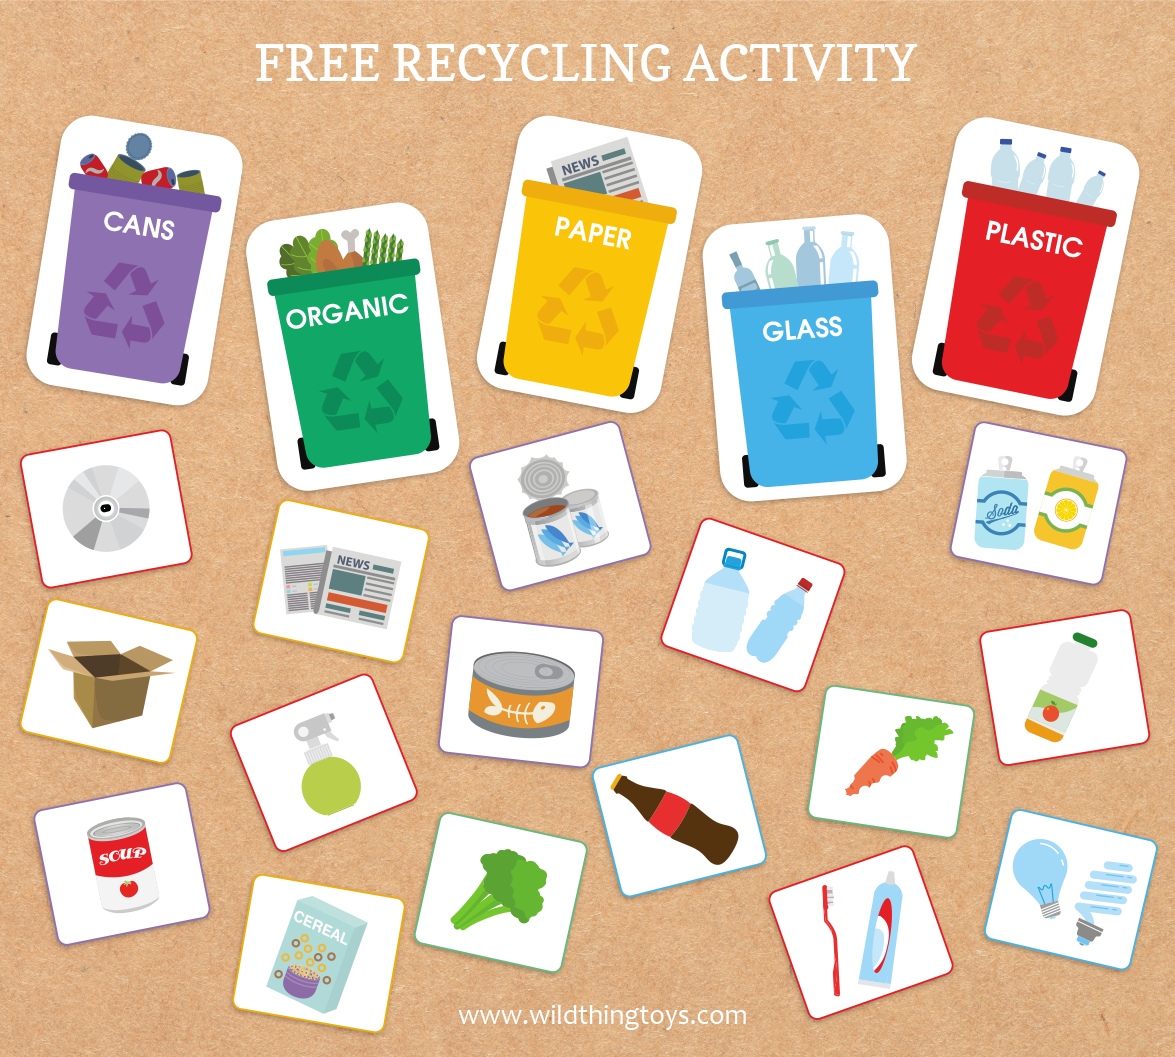 A Fun Printable Activity And Recycling Game To Help Your Kids Get Familiar With Recycling Great As Part Of A Lesson Plan Or Just An Educational Activity Builds On Concentration And Motor